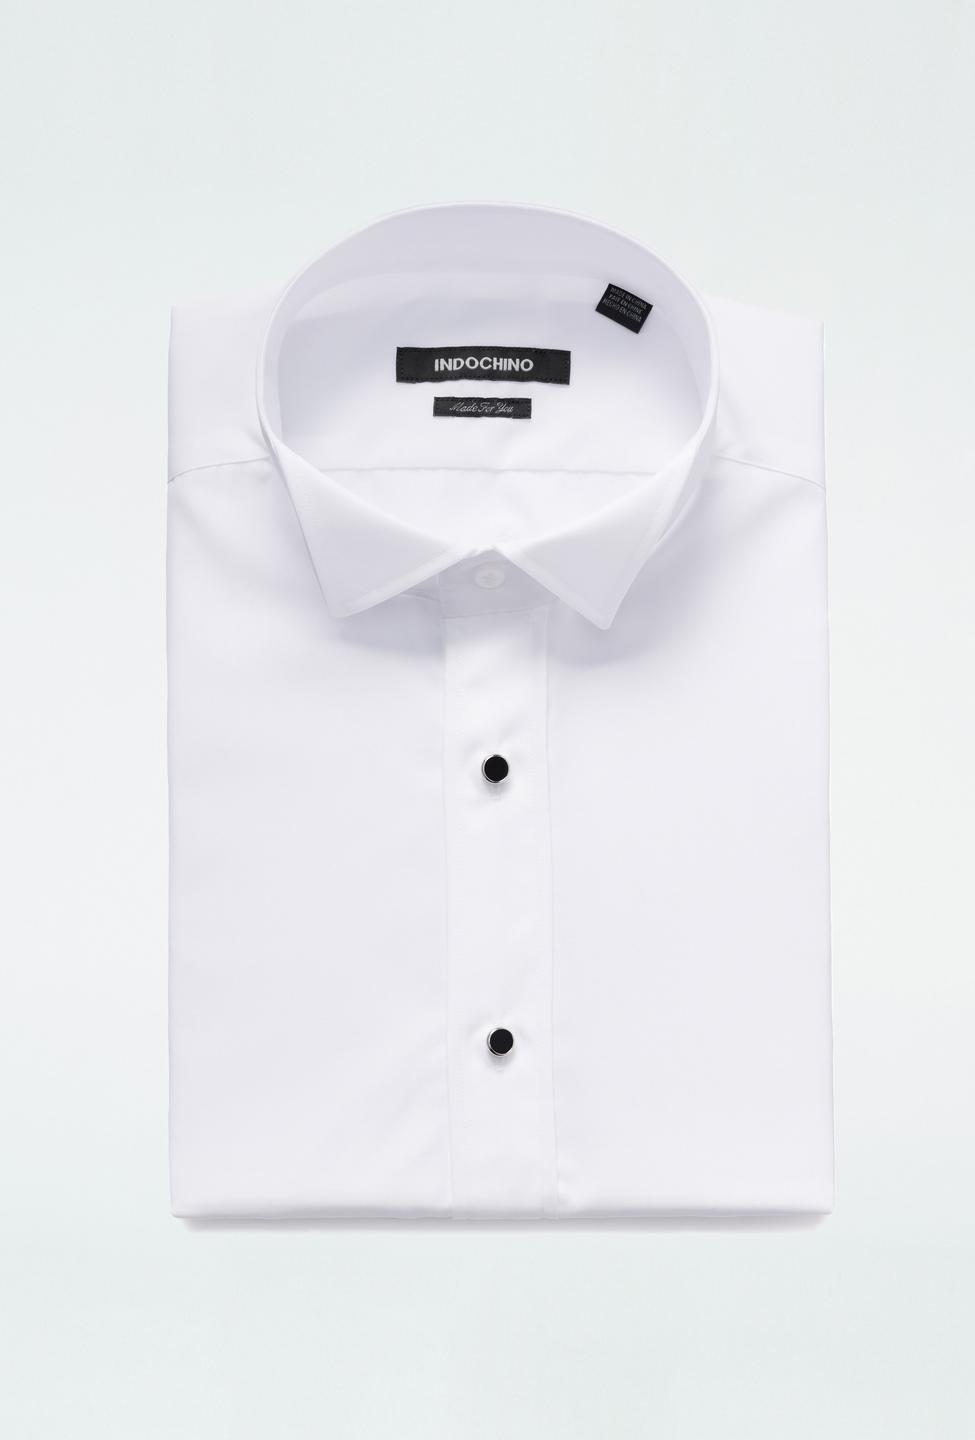 White shirt - Helston Solid Design from Tuxedo Indochino Collection